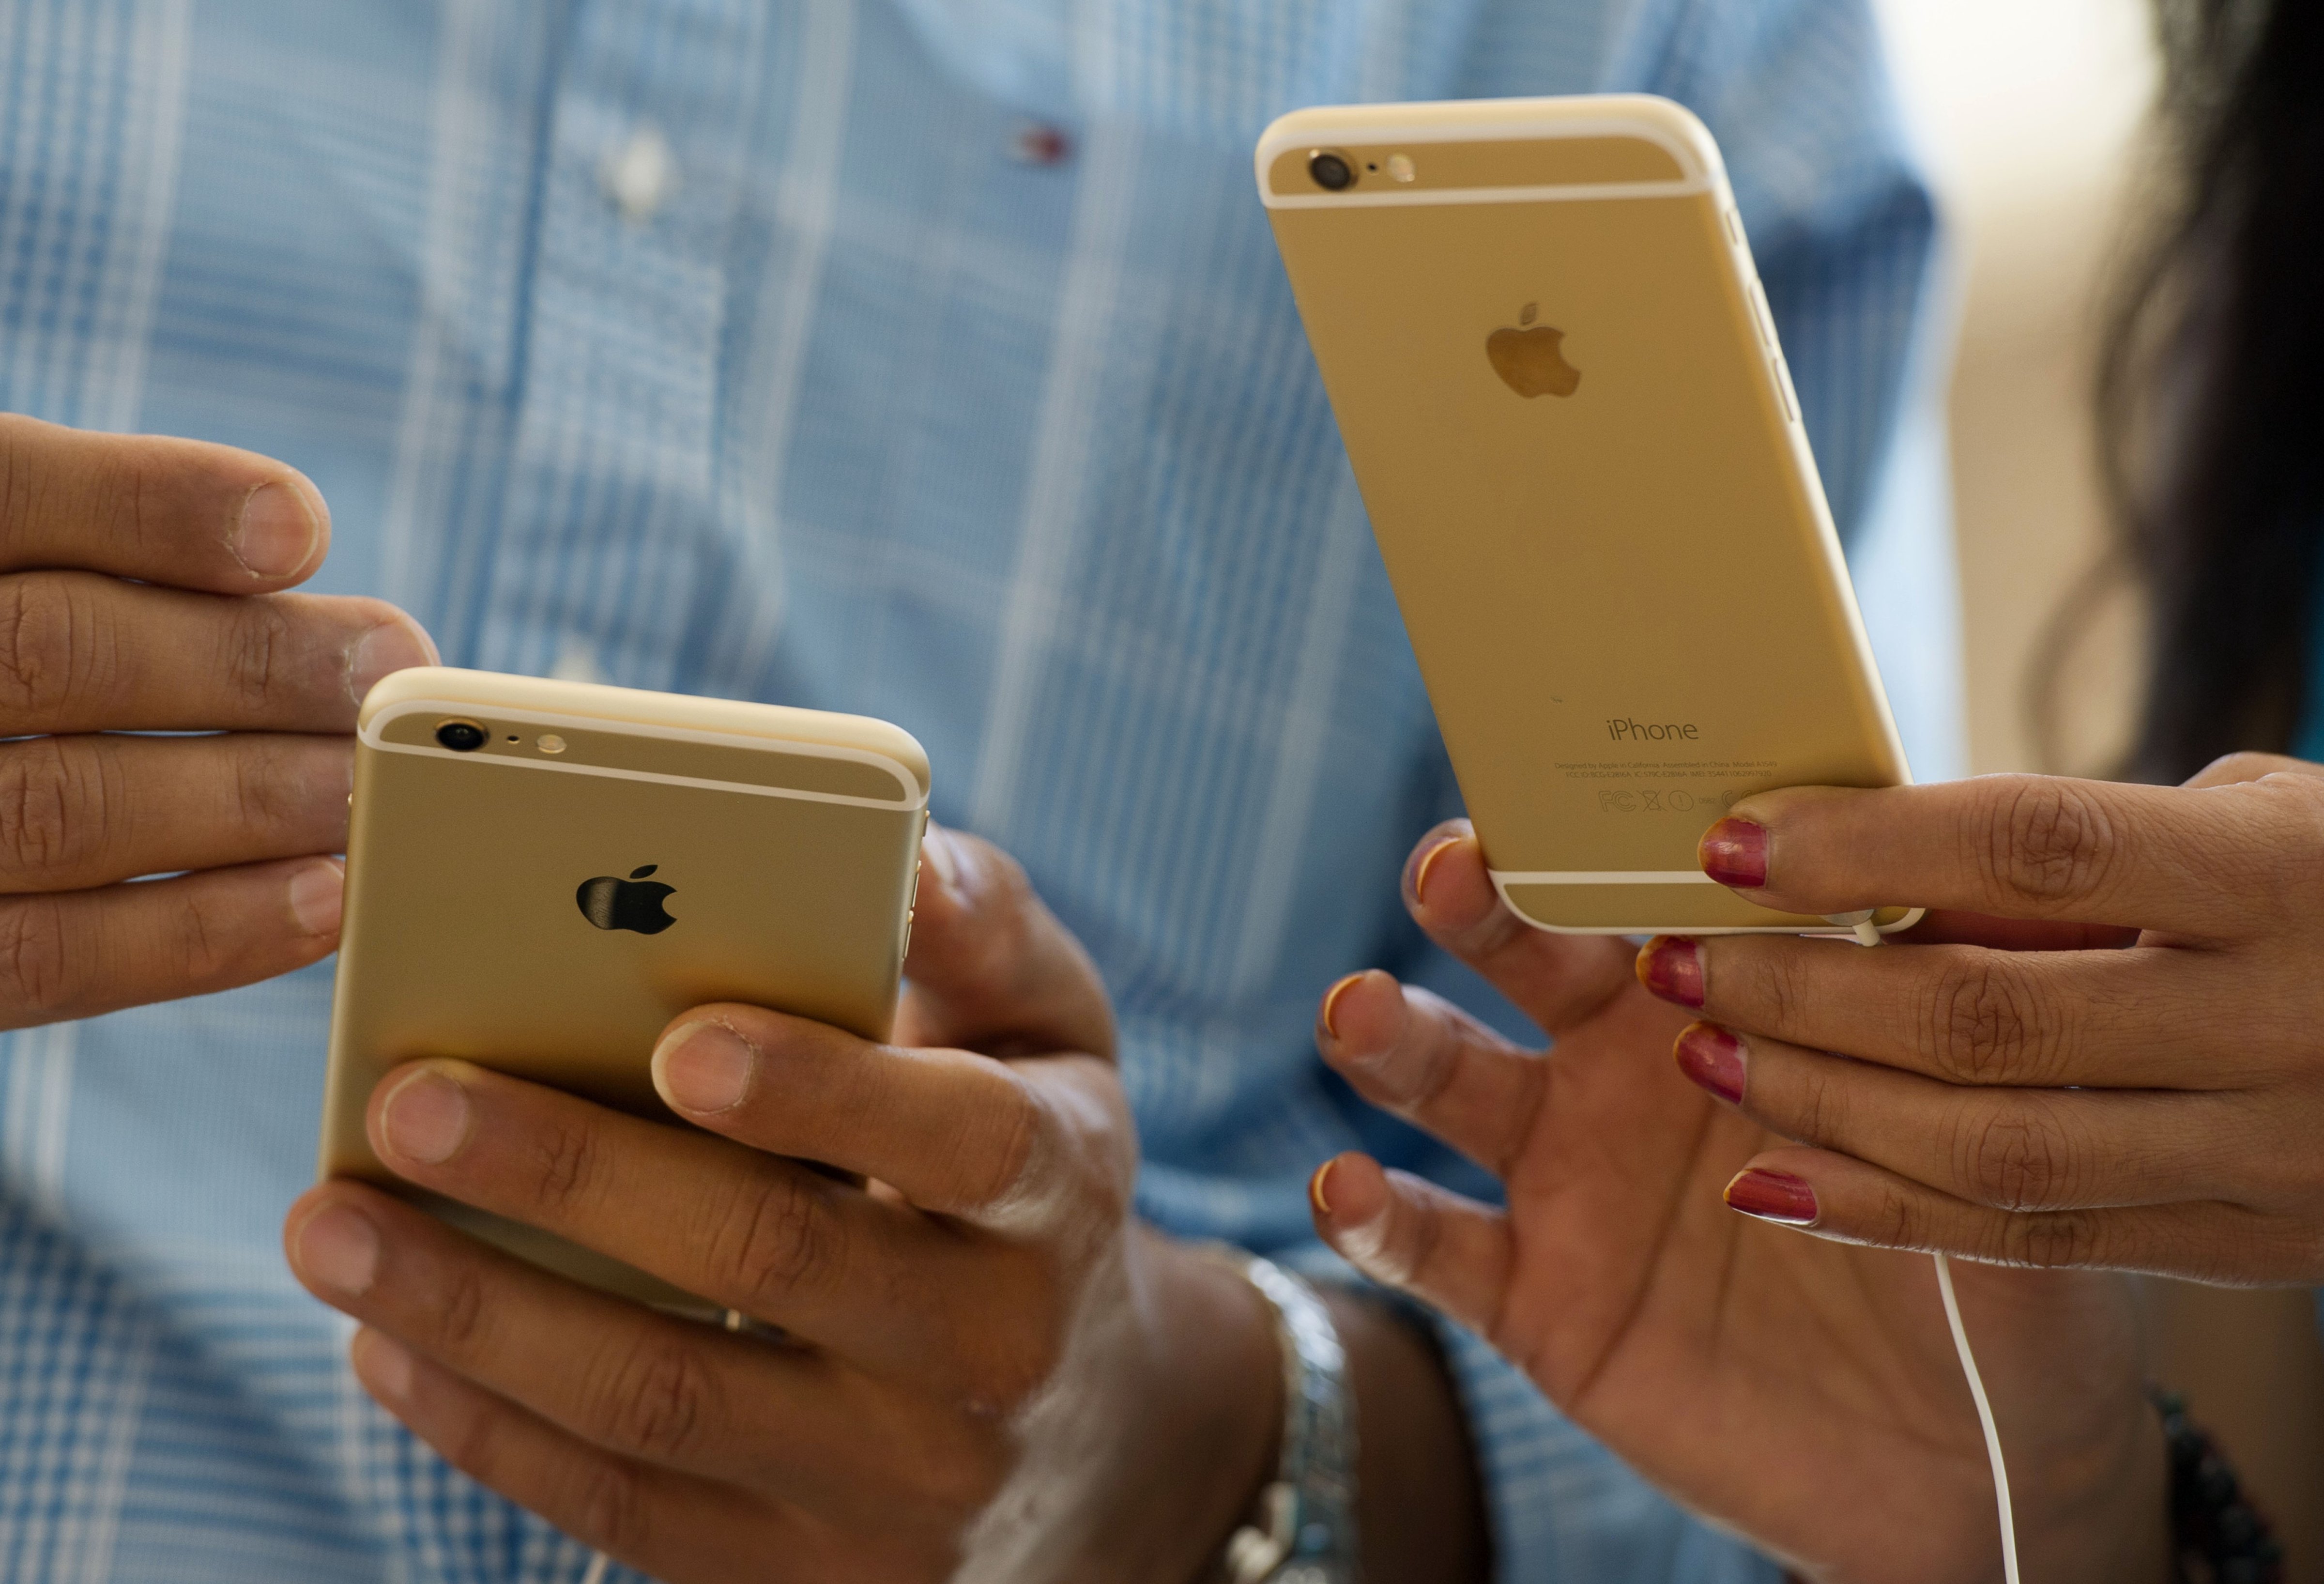 Customers compare an Apple Inc. iPhone 6, left, and iPhone 6 plus during the sales launch at an Apple store in Palo Alto, California, U.S., on Friday, Sept. 19, 2014. (Bloomberg&mdash;Bloomberg via Getty Images)